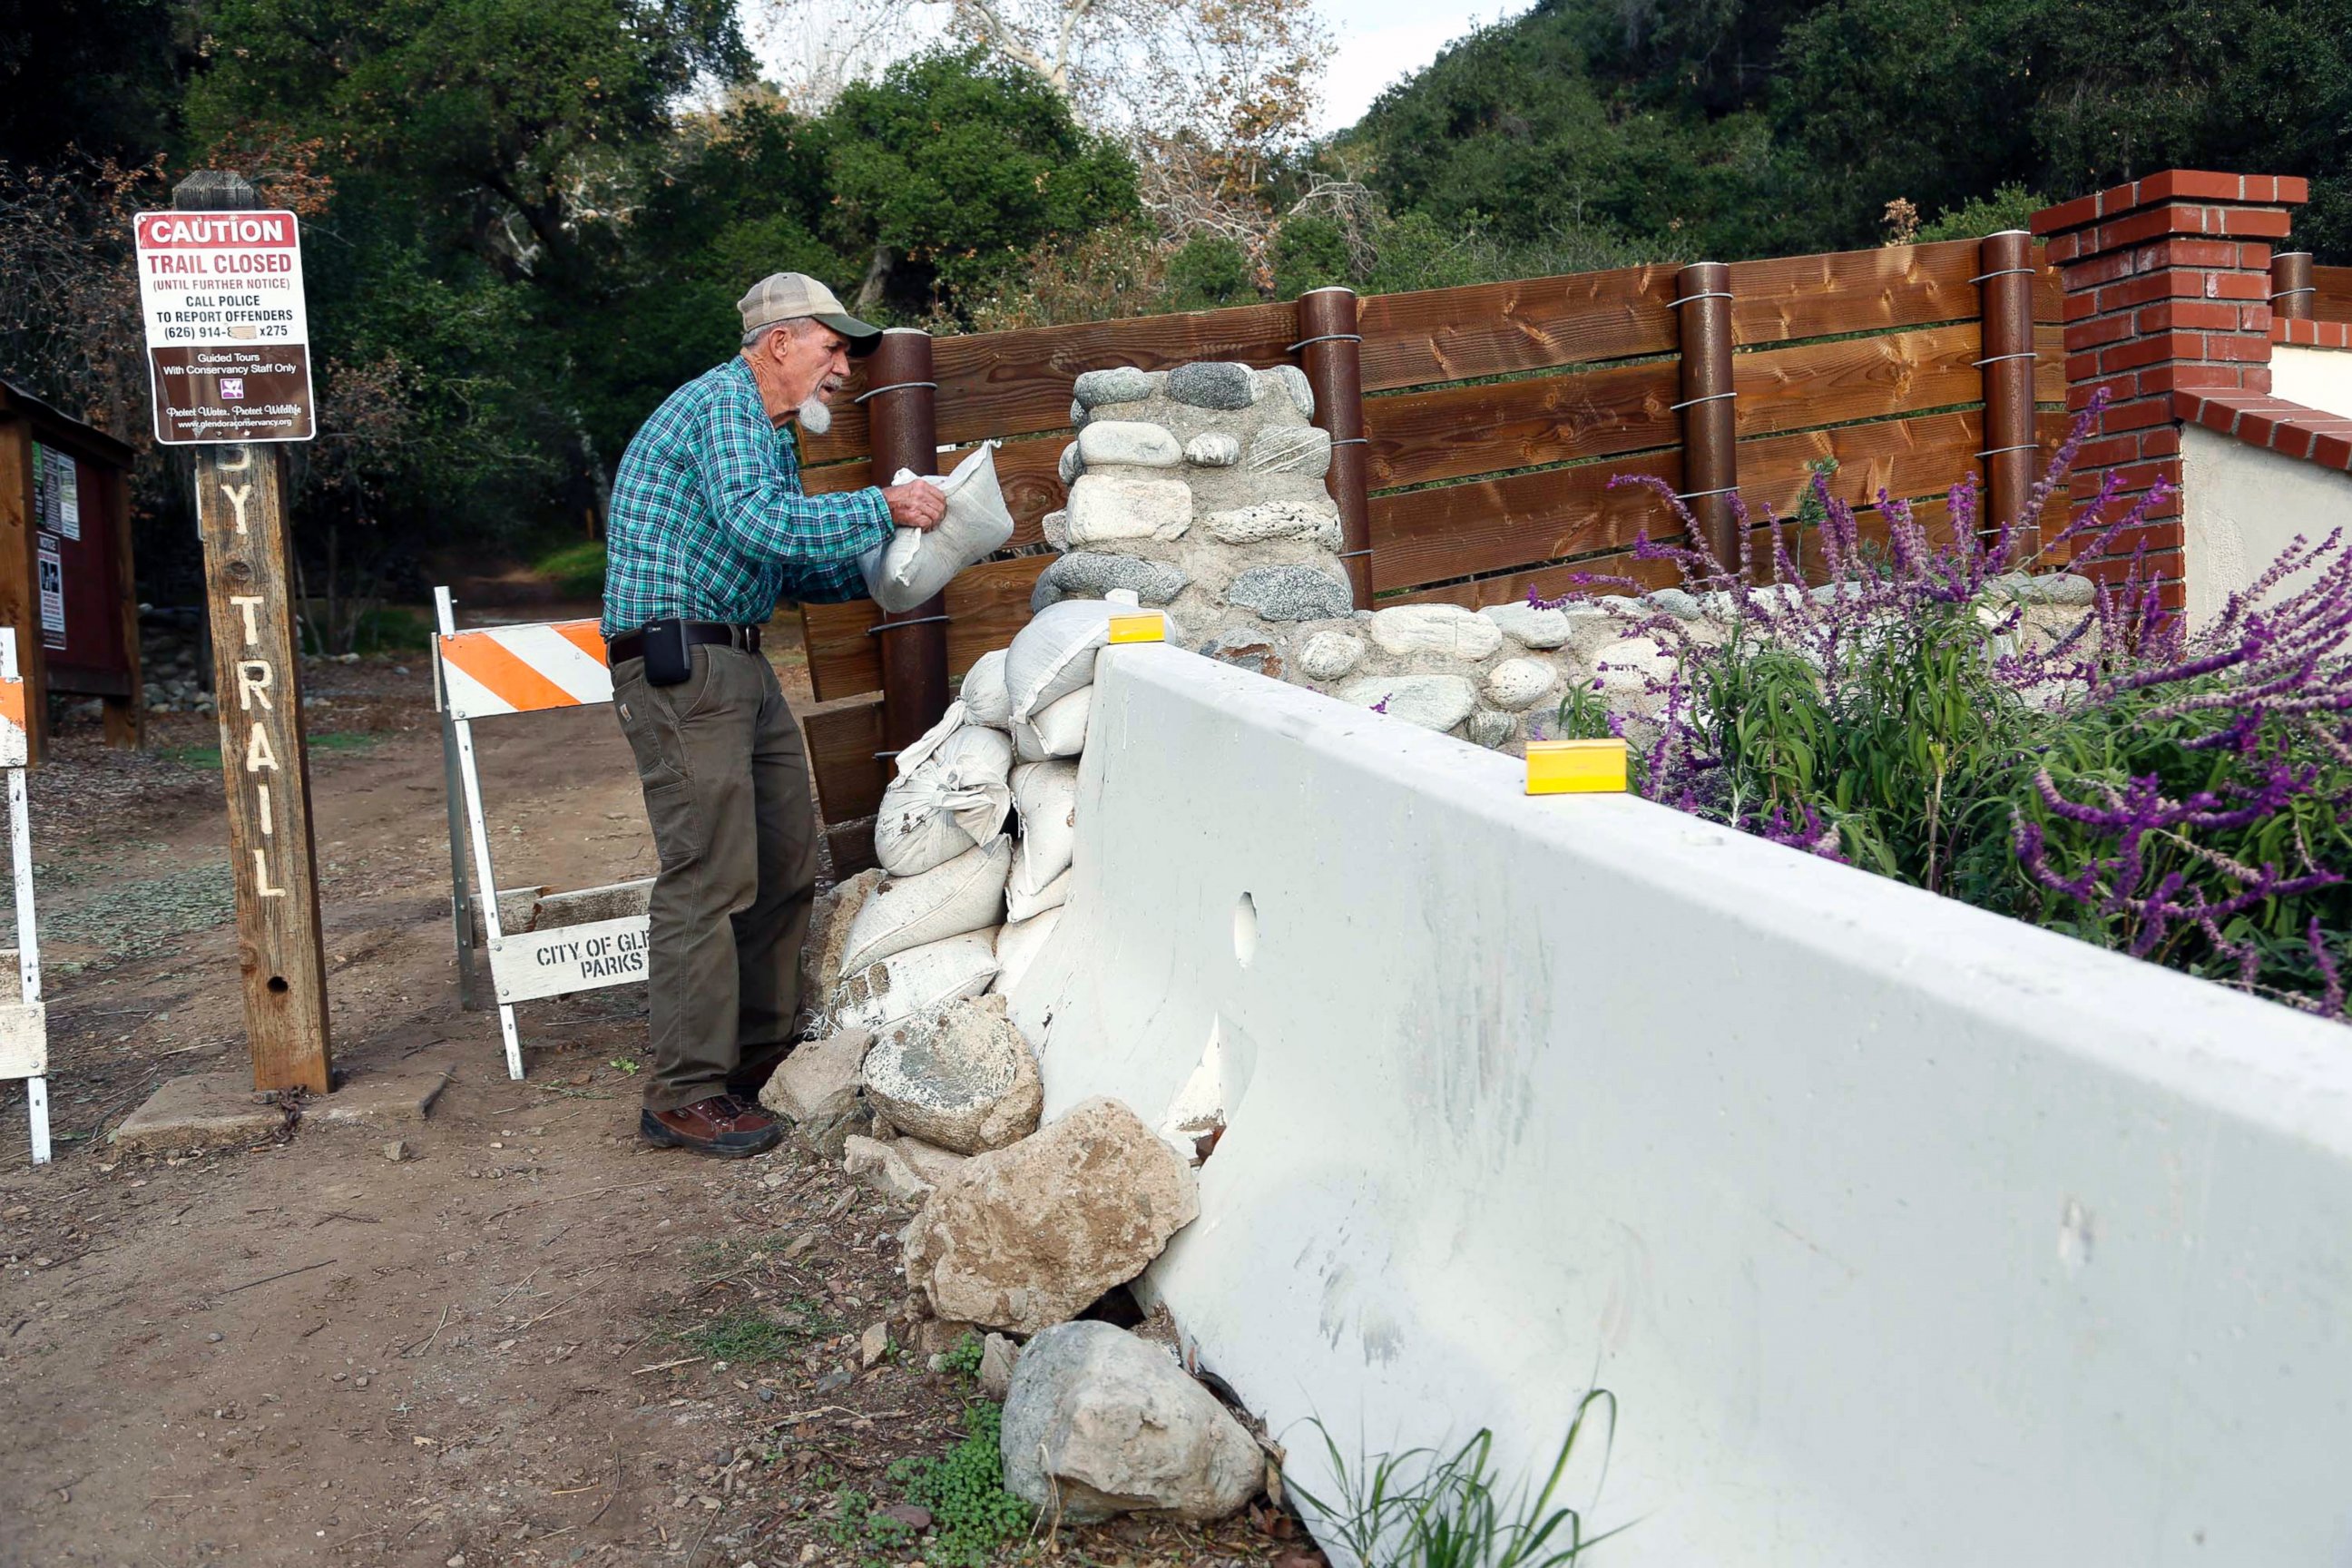 PHOTO: Jerry Croissant, 77, places sandbags to protect his home from mudslides outside his home in Gelndra, Calif., below mountains burned over in wildfires, Dec. 10, 2014.